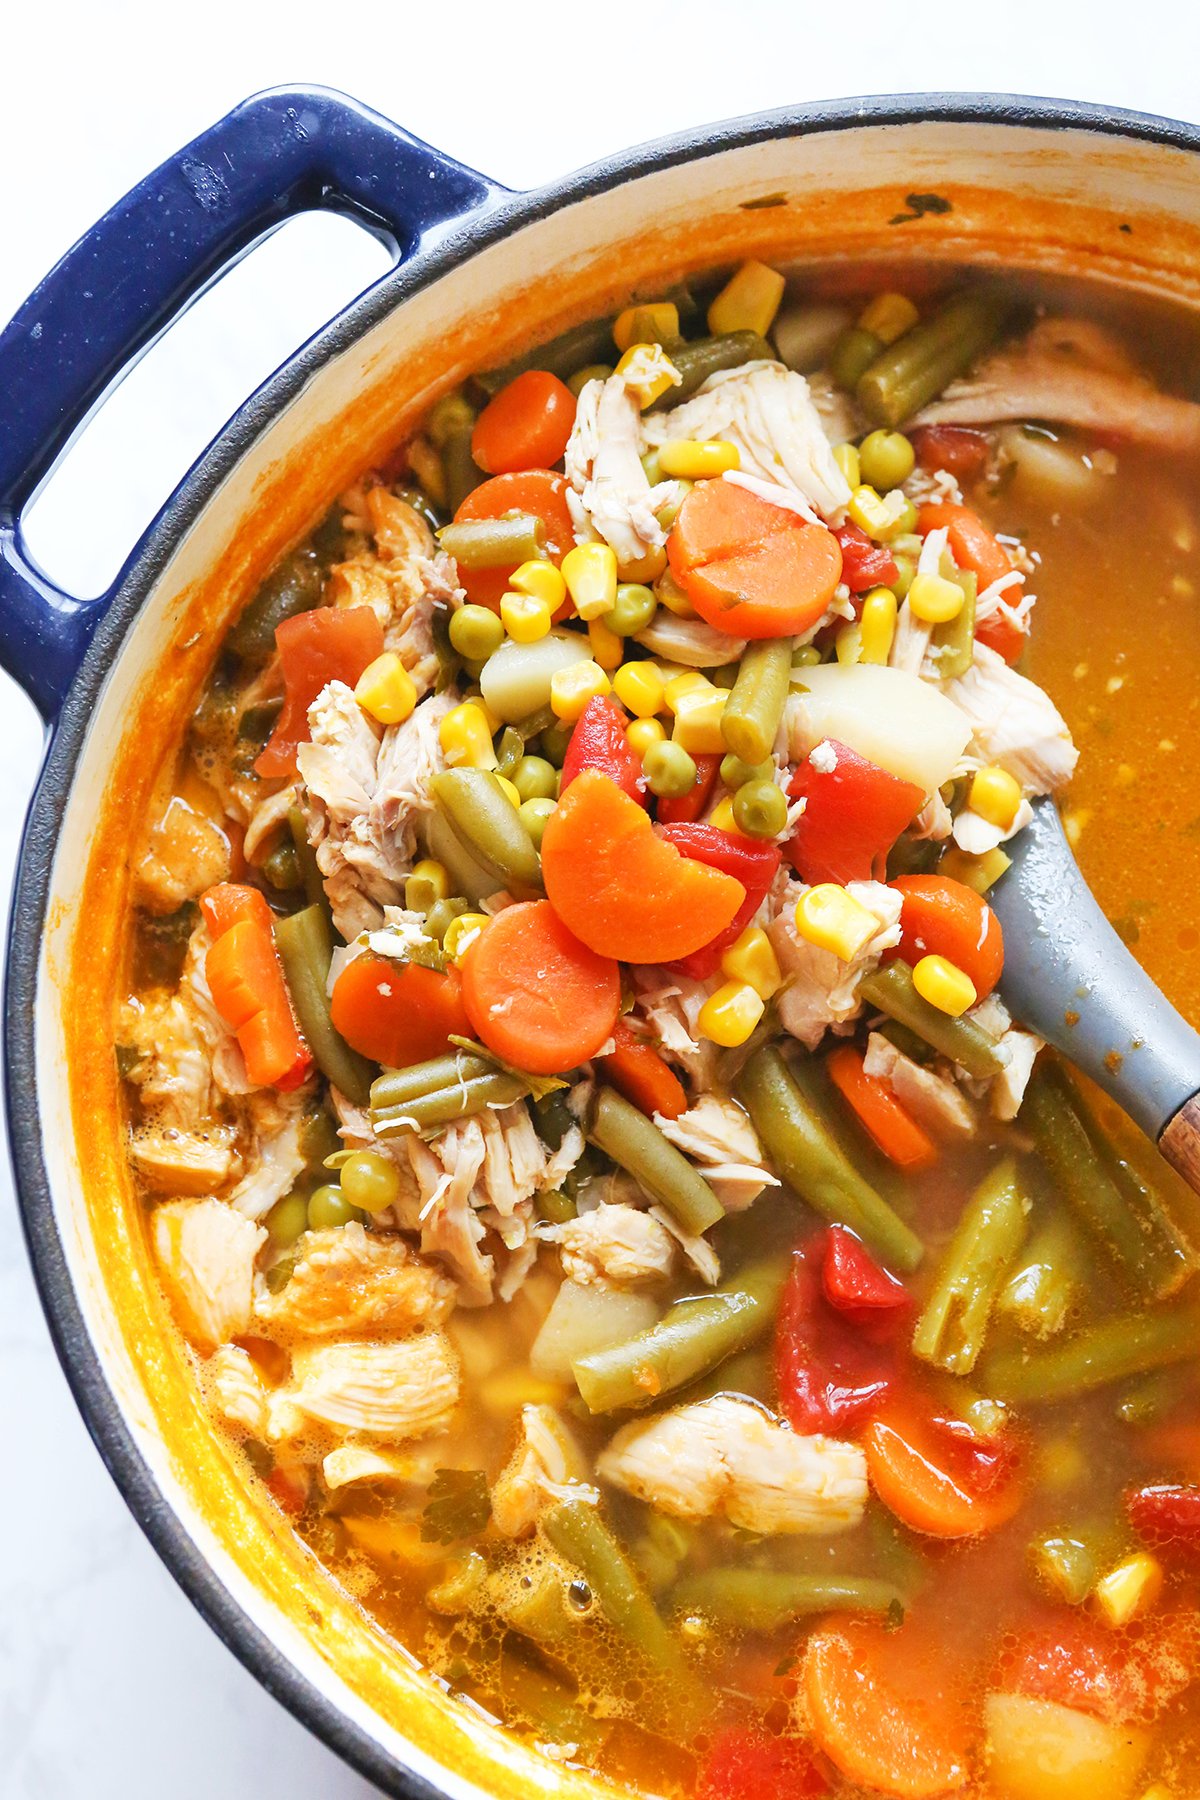 Top close-up view of a Dutch oven filled with chicken vegetable soup.